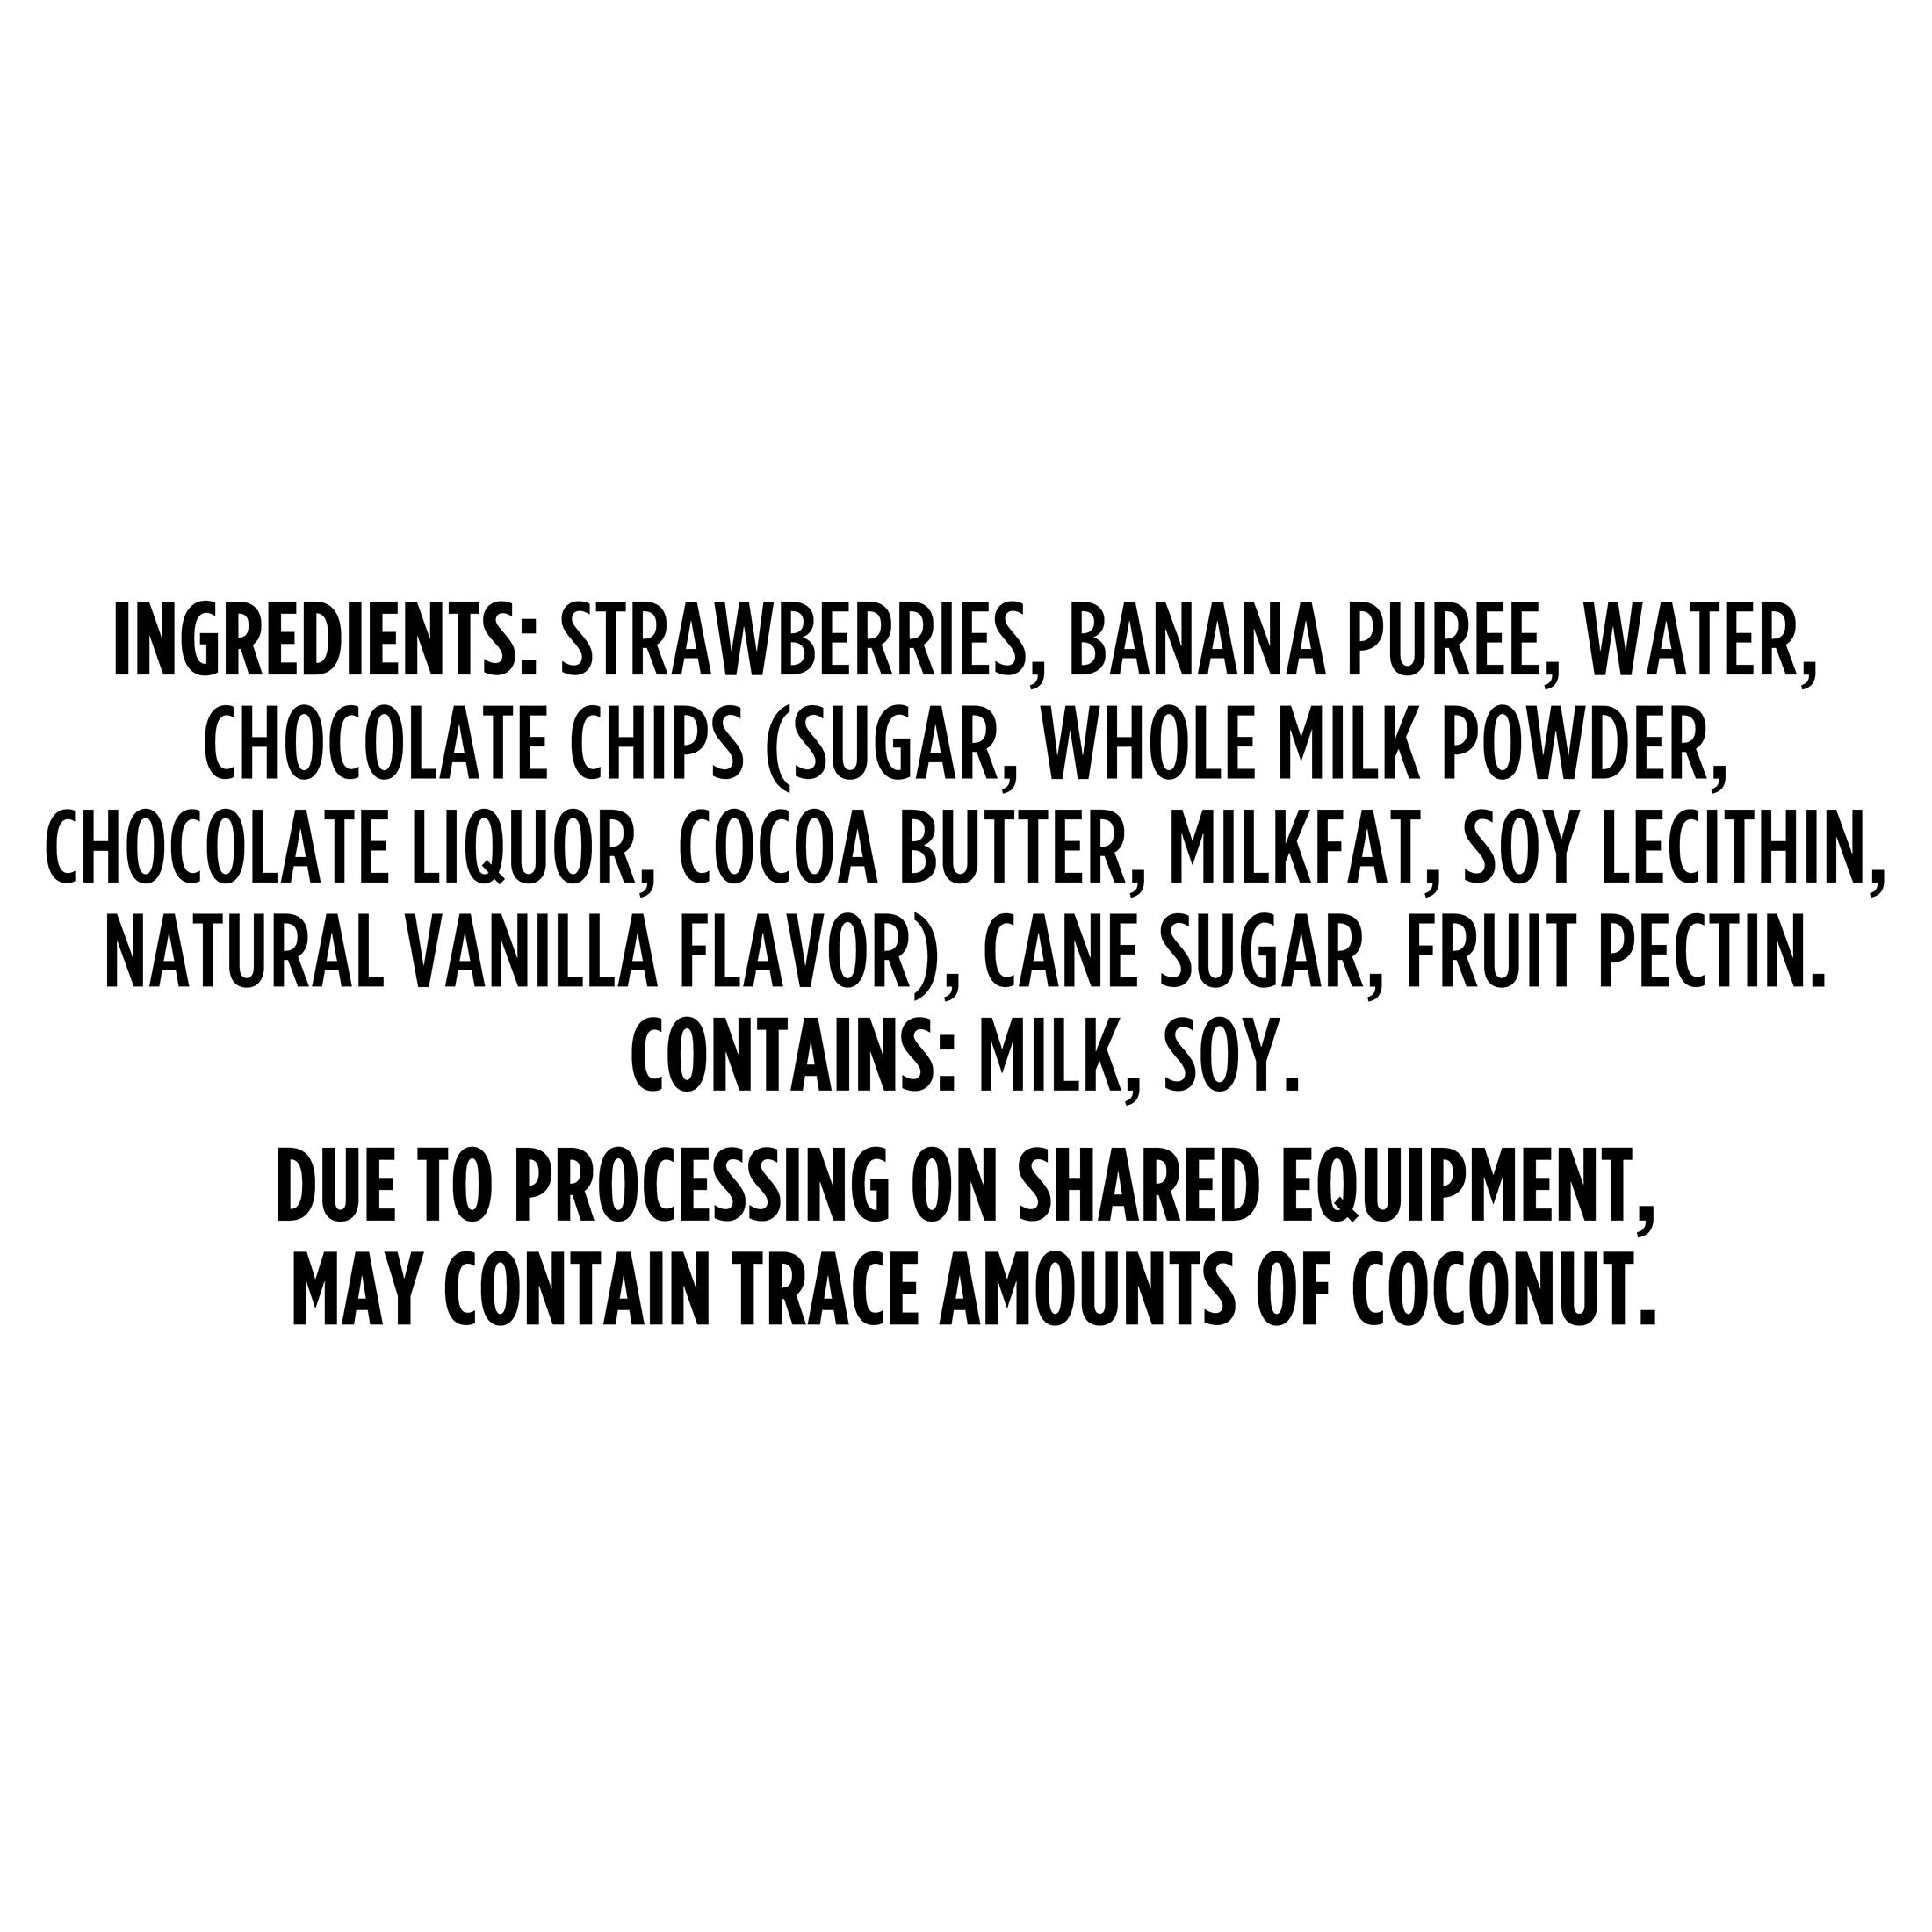 A list of Shop Wyman's Just Fruit - Banana Bites with Chocolate ingredients on a white background.